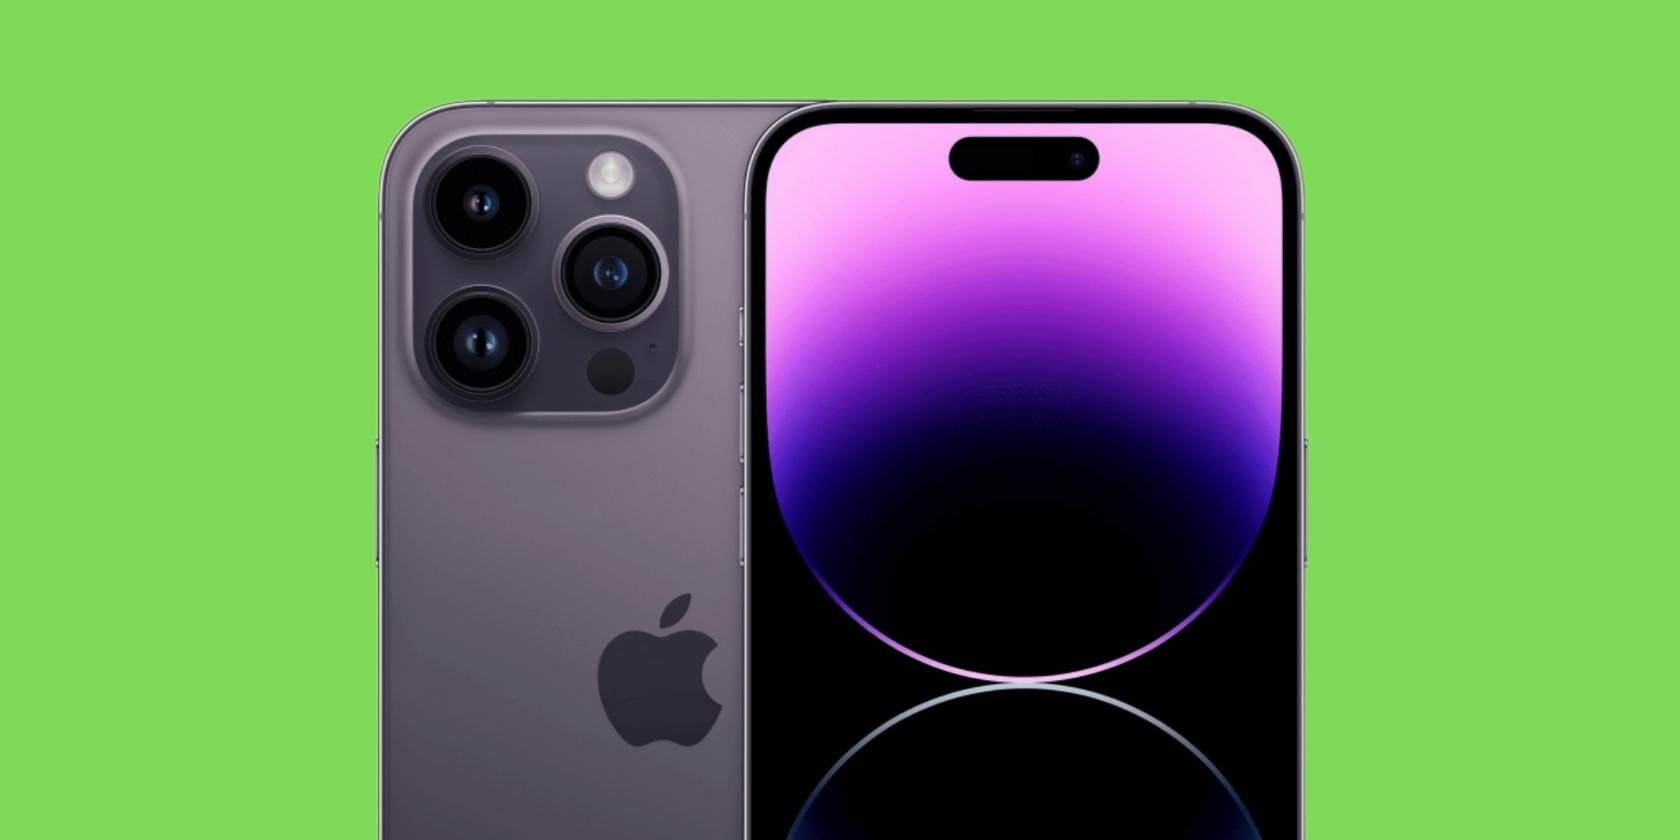 The top half of iPhone 14 Pro from the front with a green background